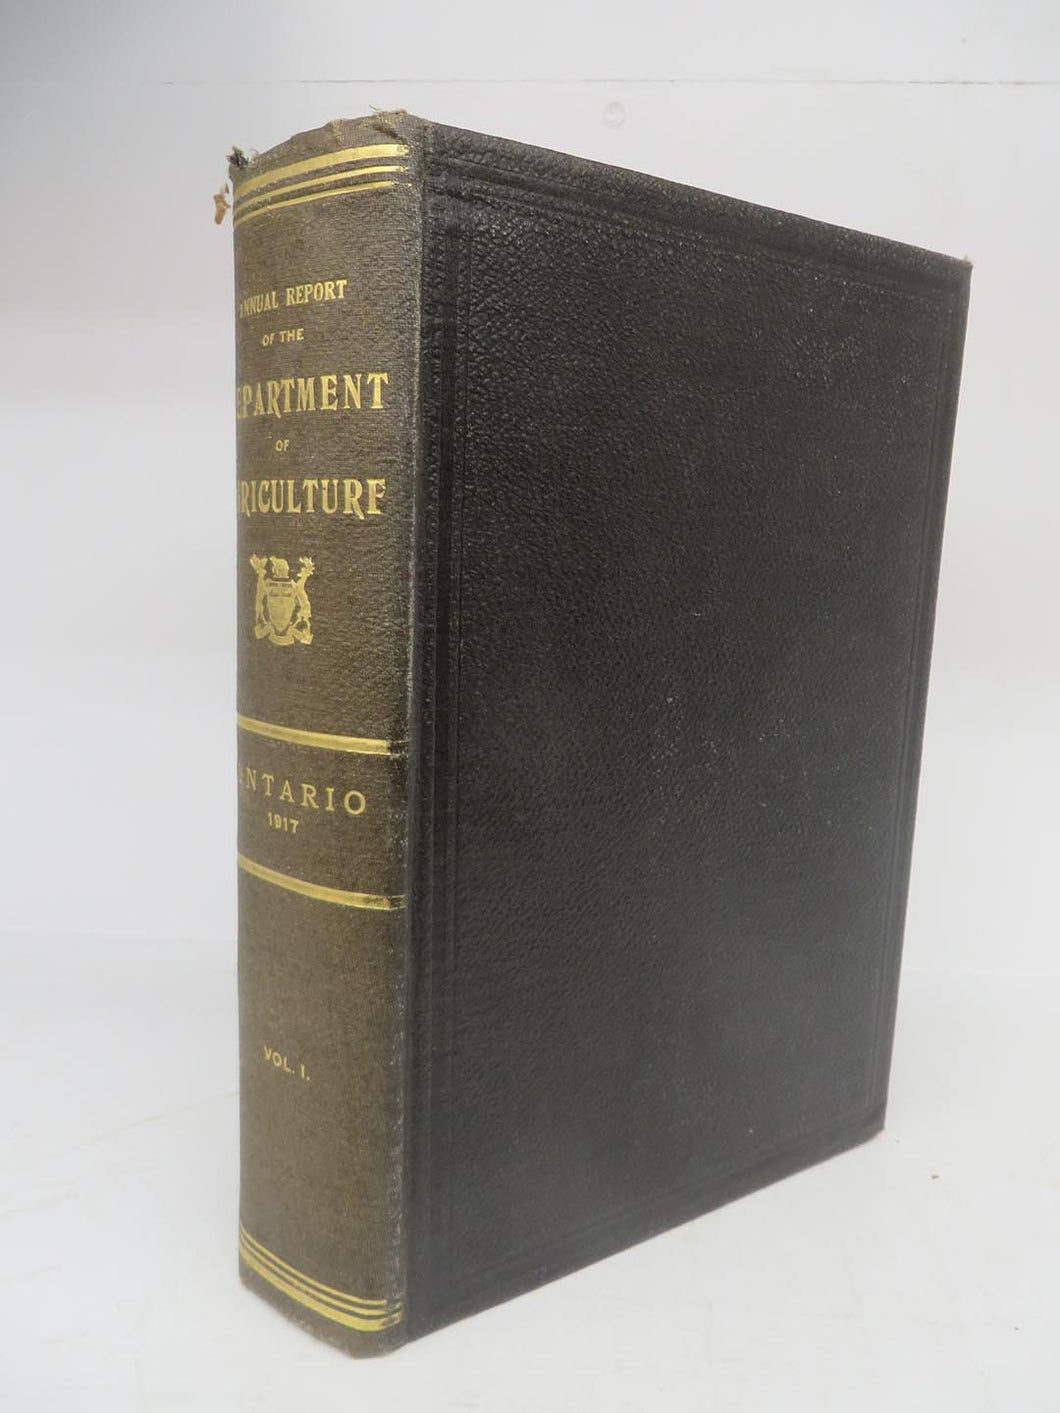 Annual Report of the Department of Agriculture of the Province of Ontario. 1917: Vol. I